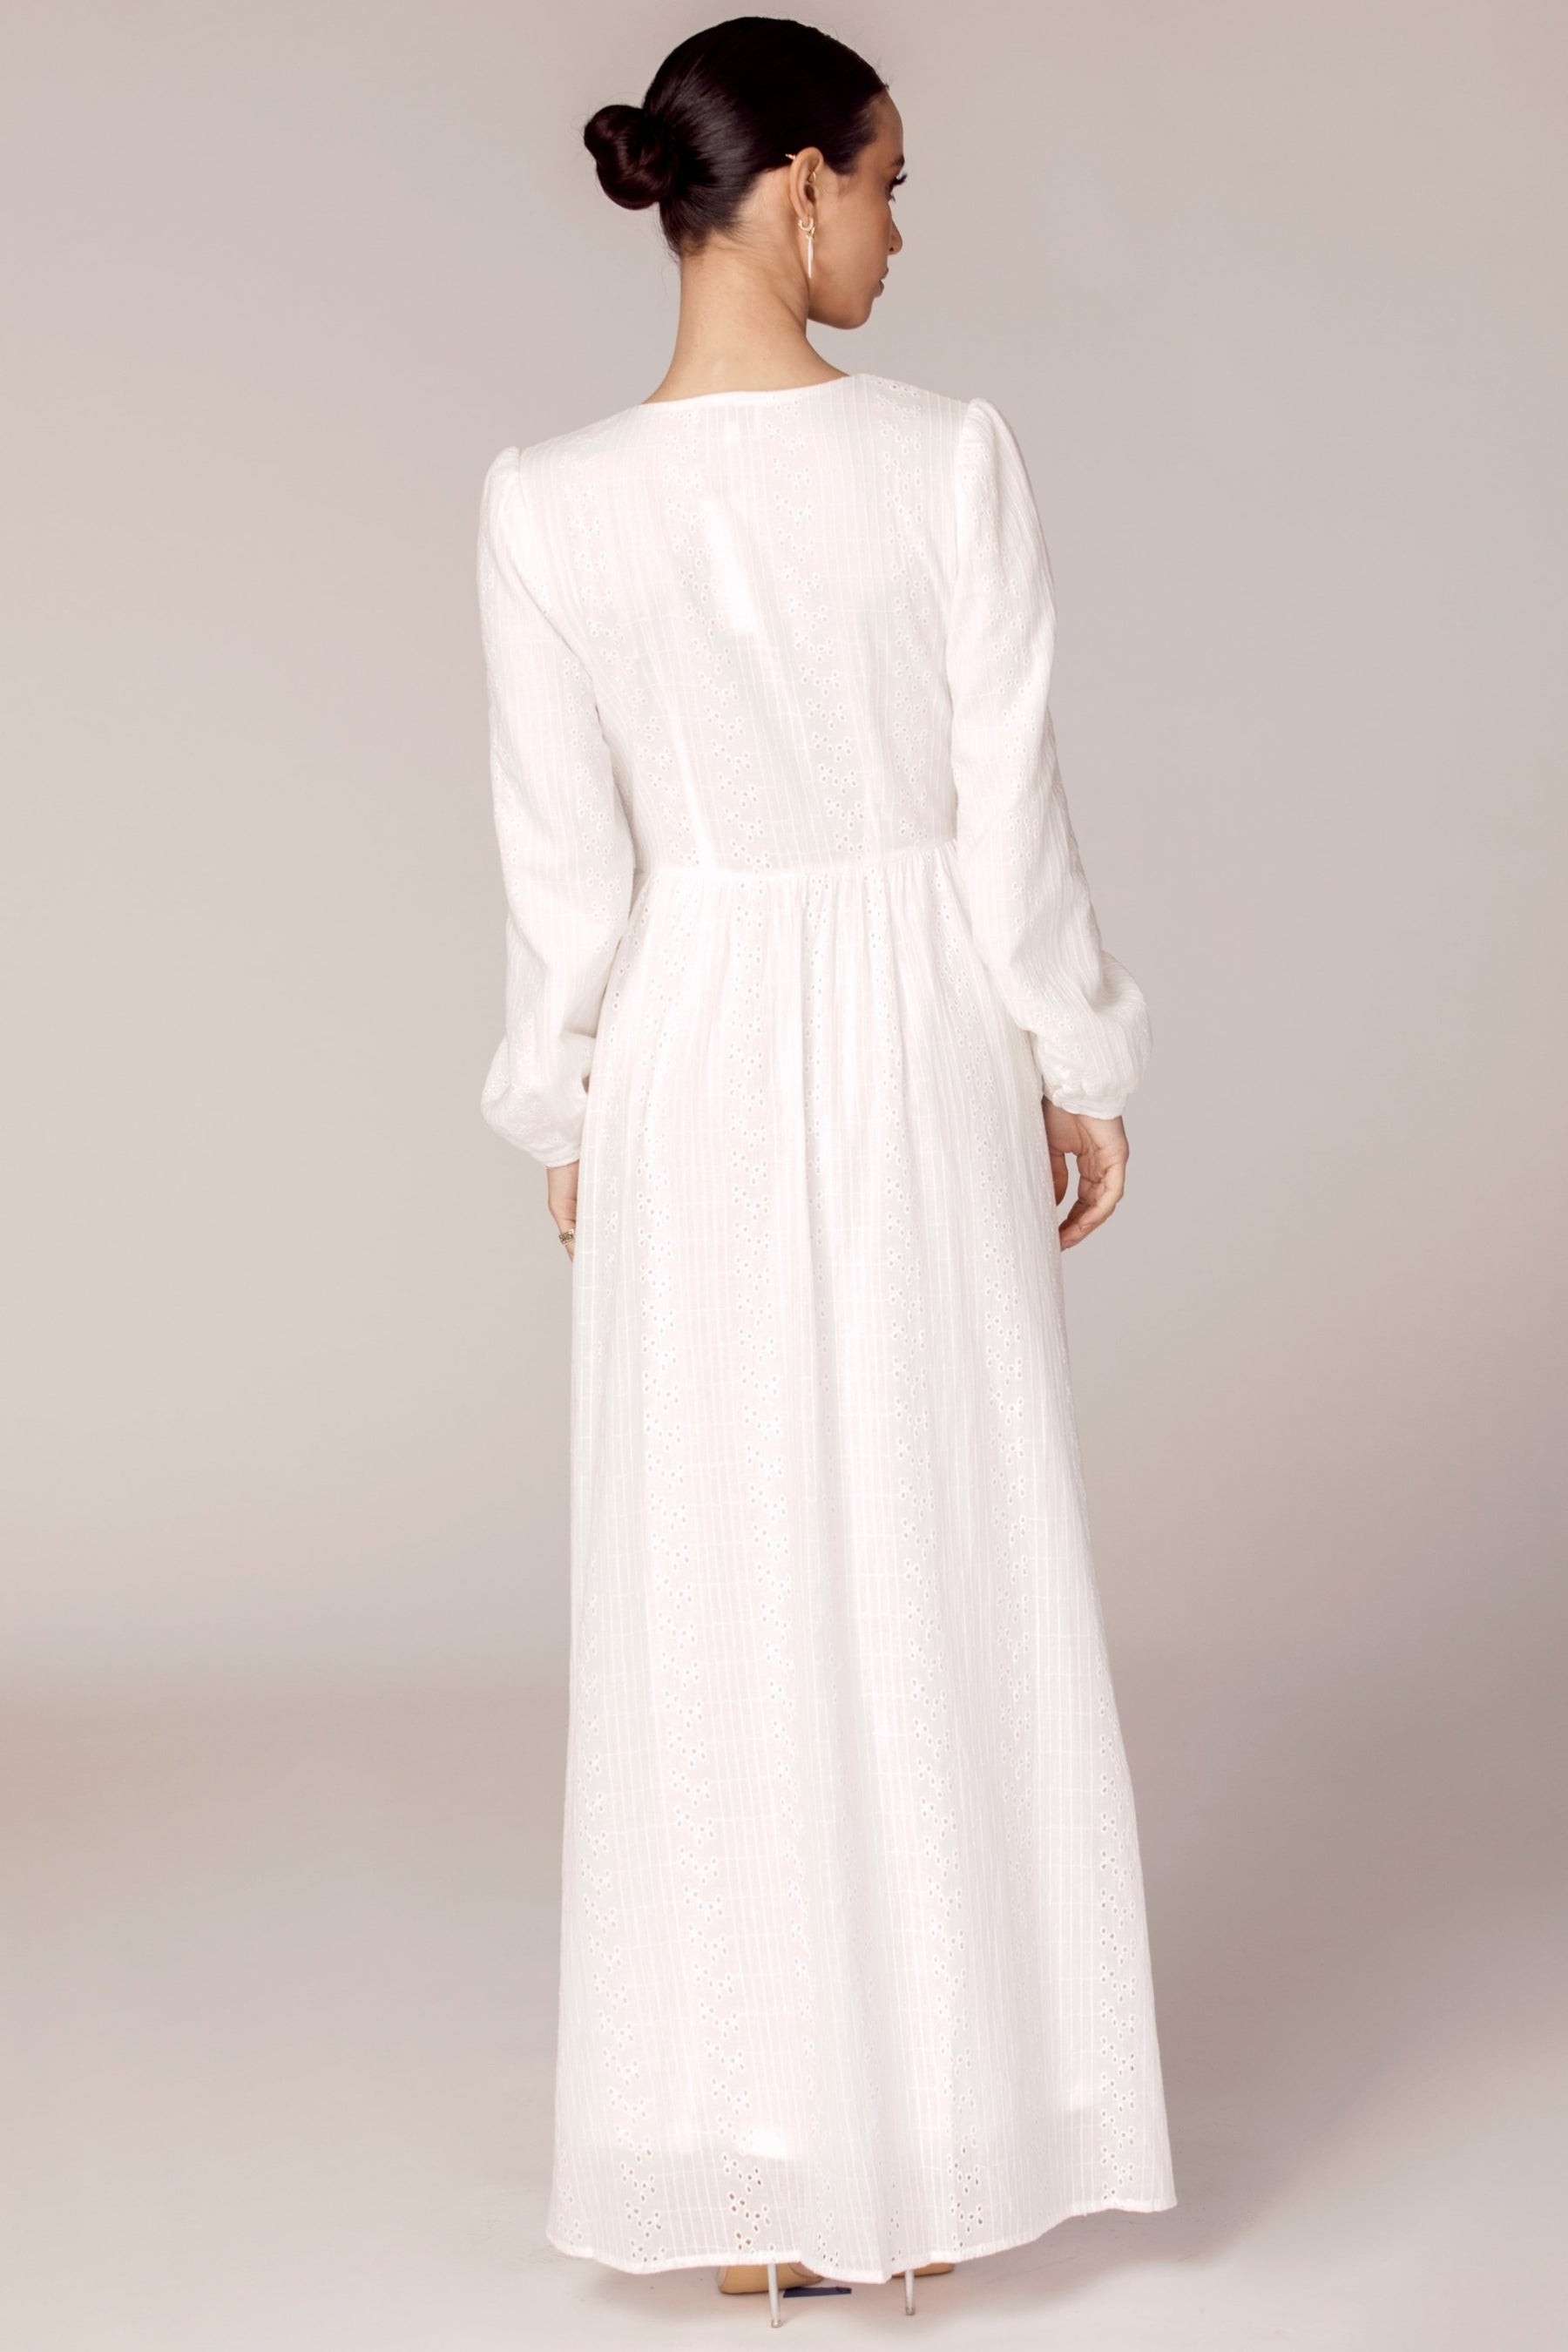 Aya Eyelet Cotton Button Front Maxi Dress Dresses Veiled Collection 